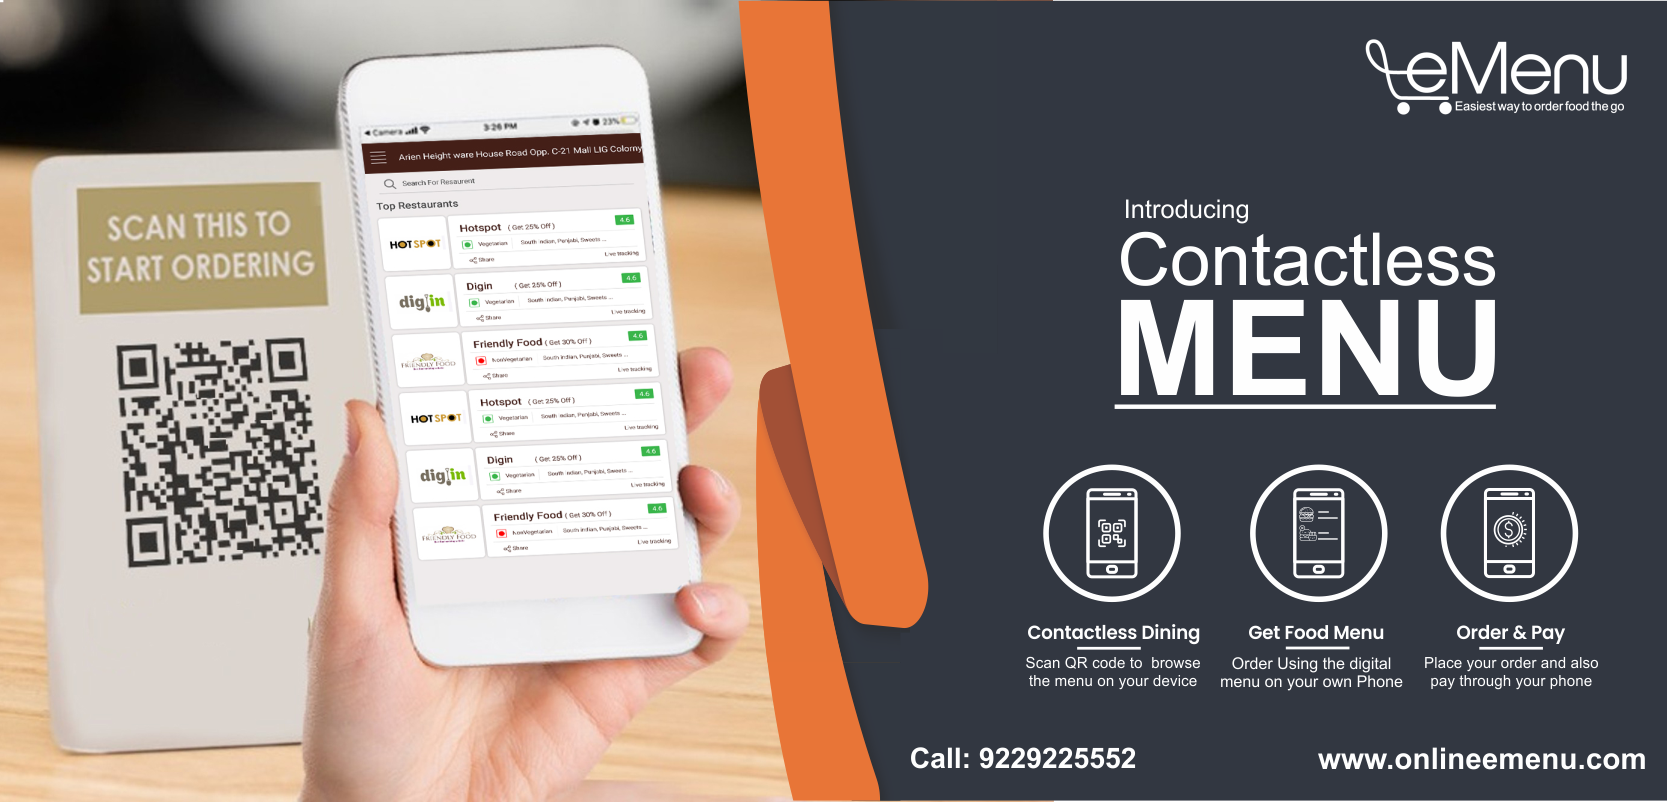 Refurnish your restaurant menu with a contactless ordering system